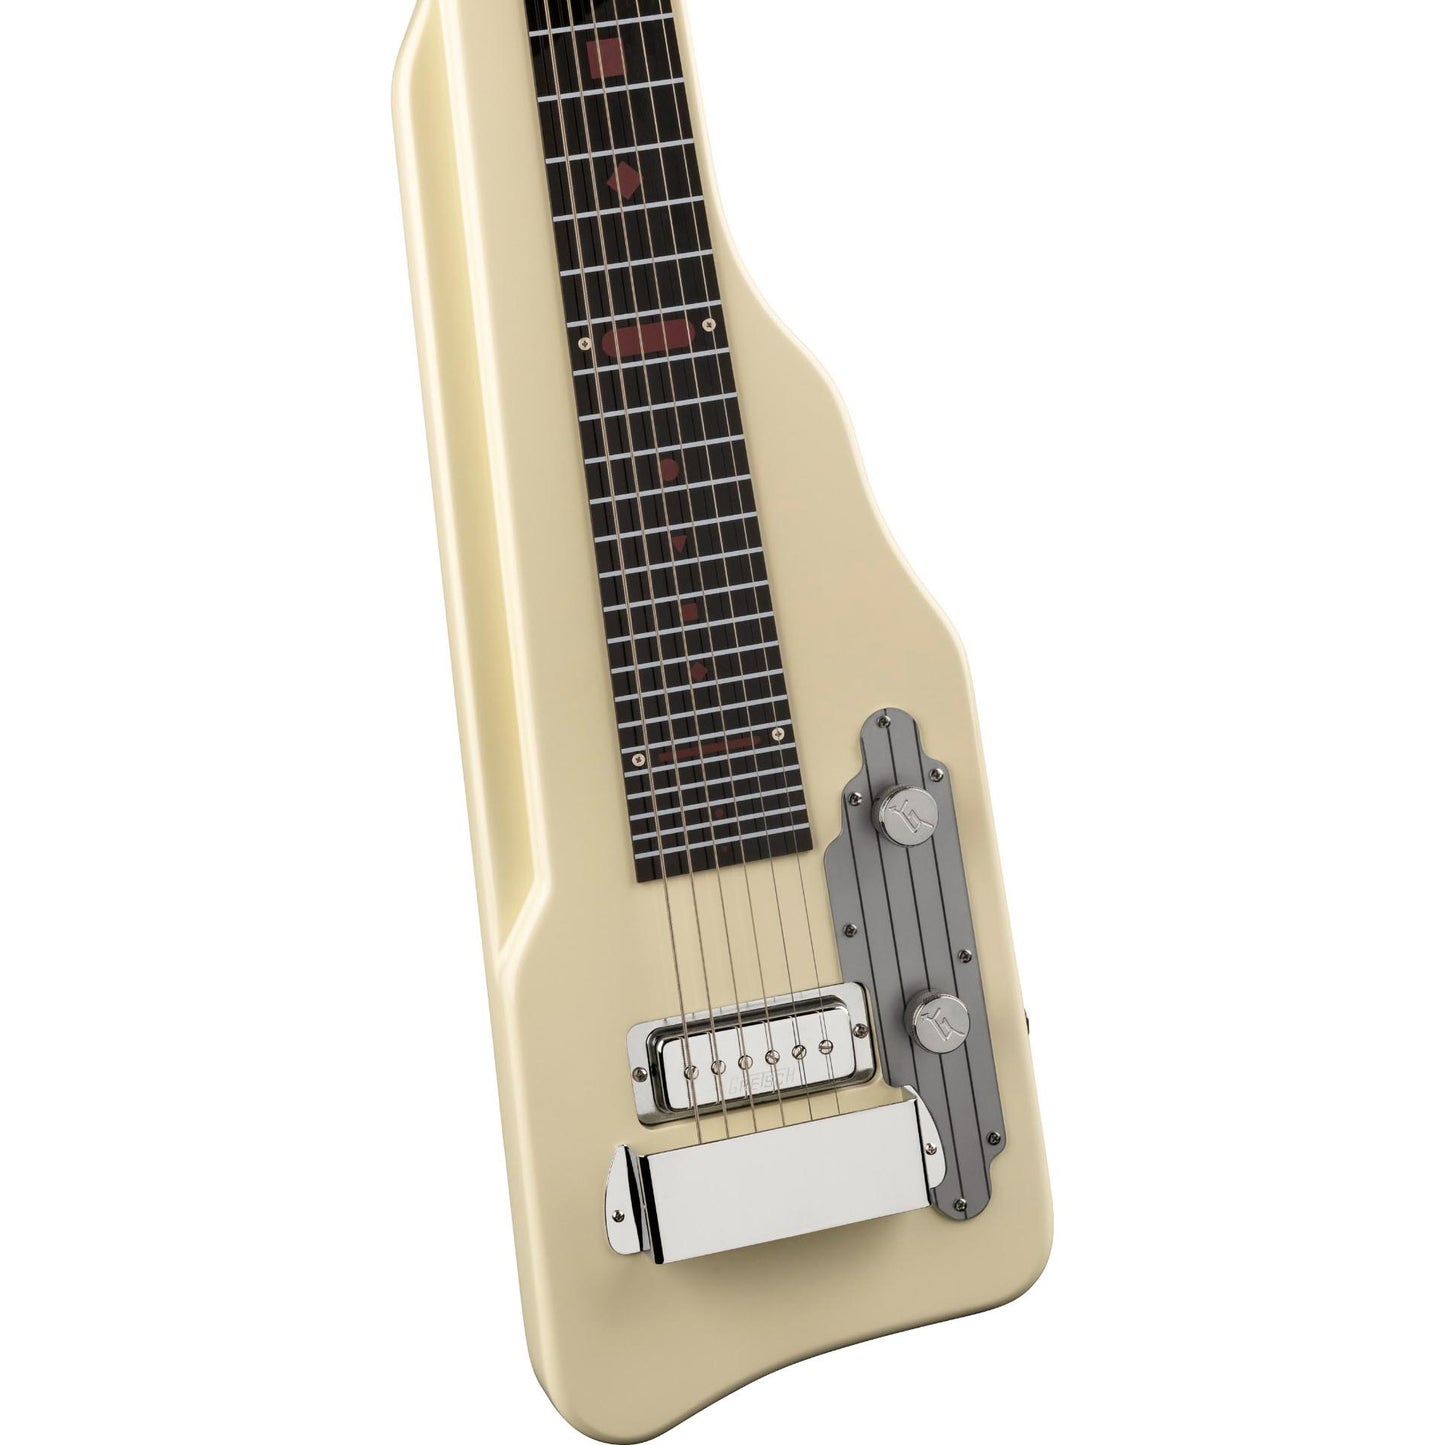 Gretsch G5700 Electromatic Lap Steel Electric Guitar in Vintage White